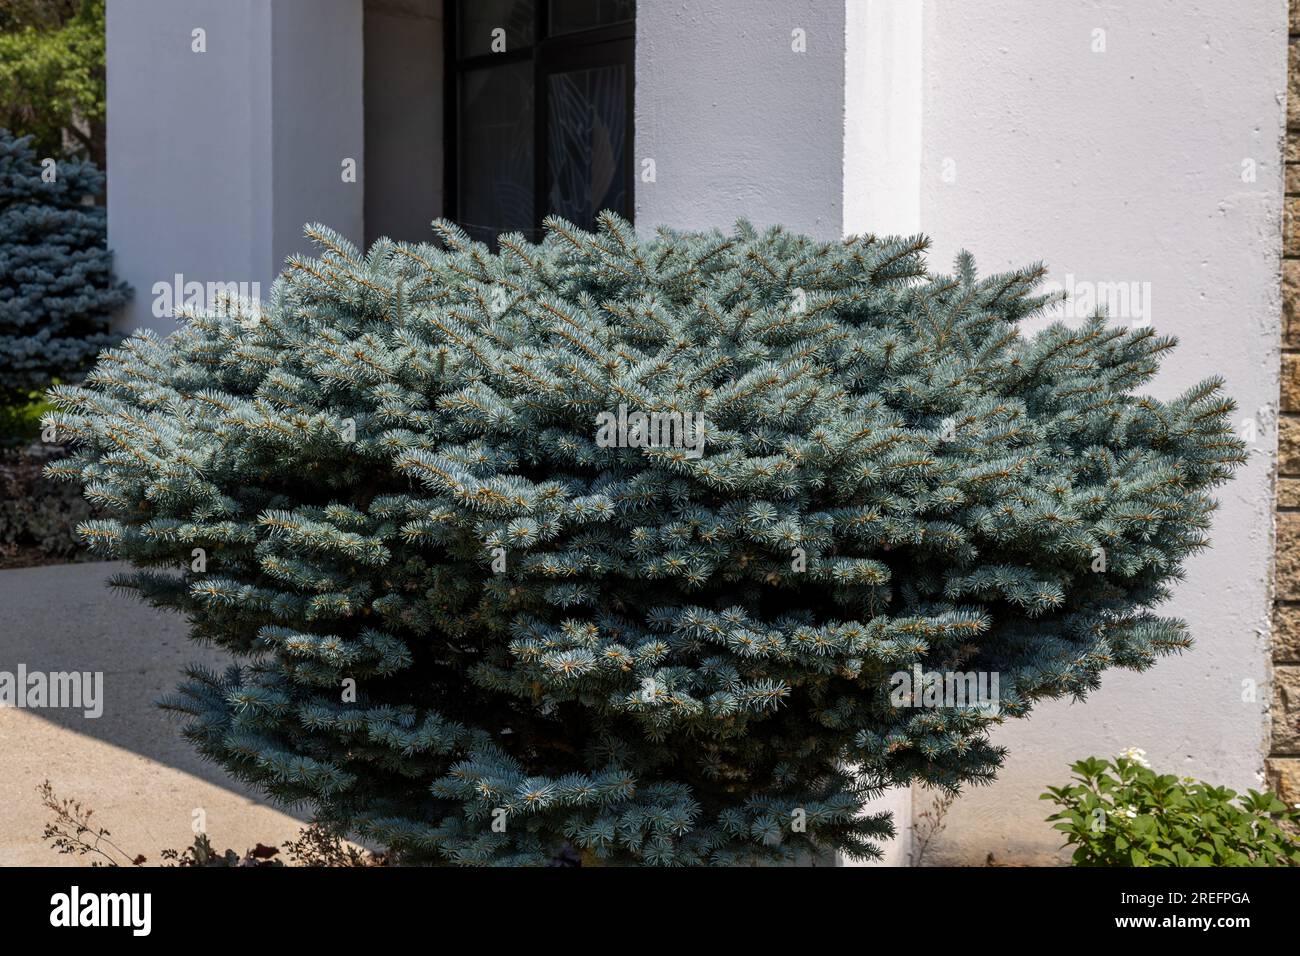 Close up view of an attractive globe blue spruce (picea pungens) shrub used as a landscaping plant next to a white building Stock Photo